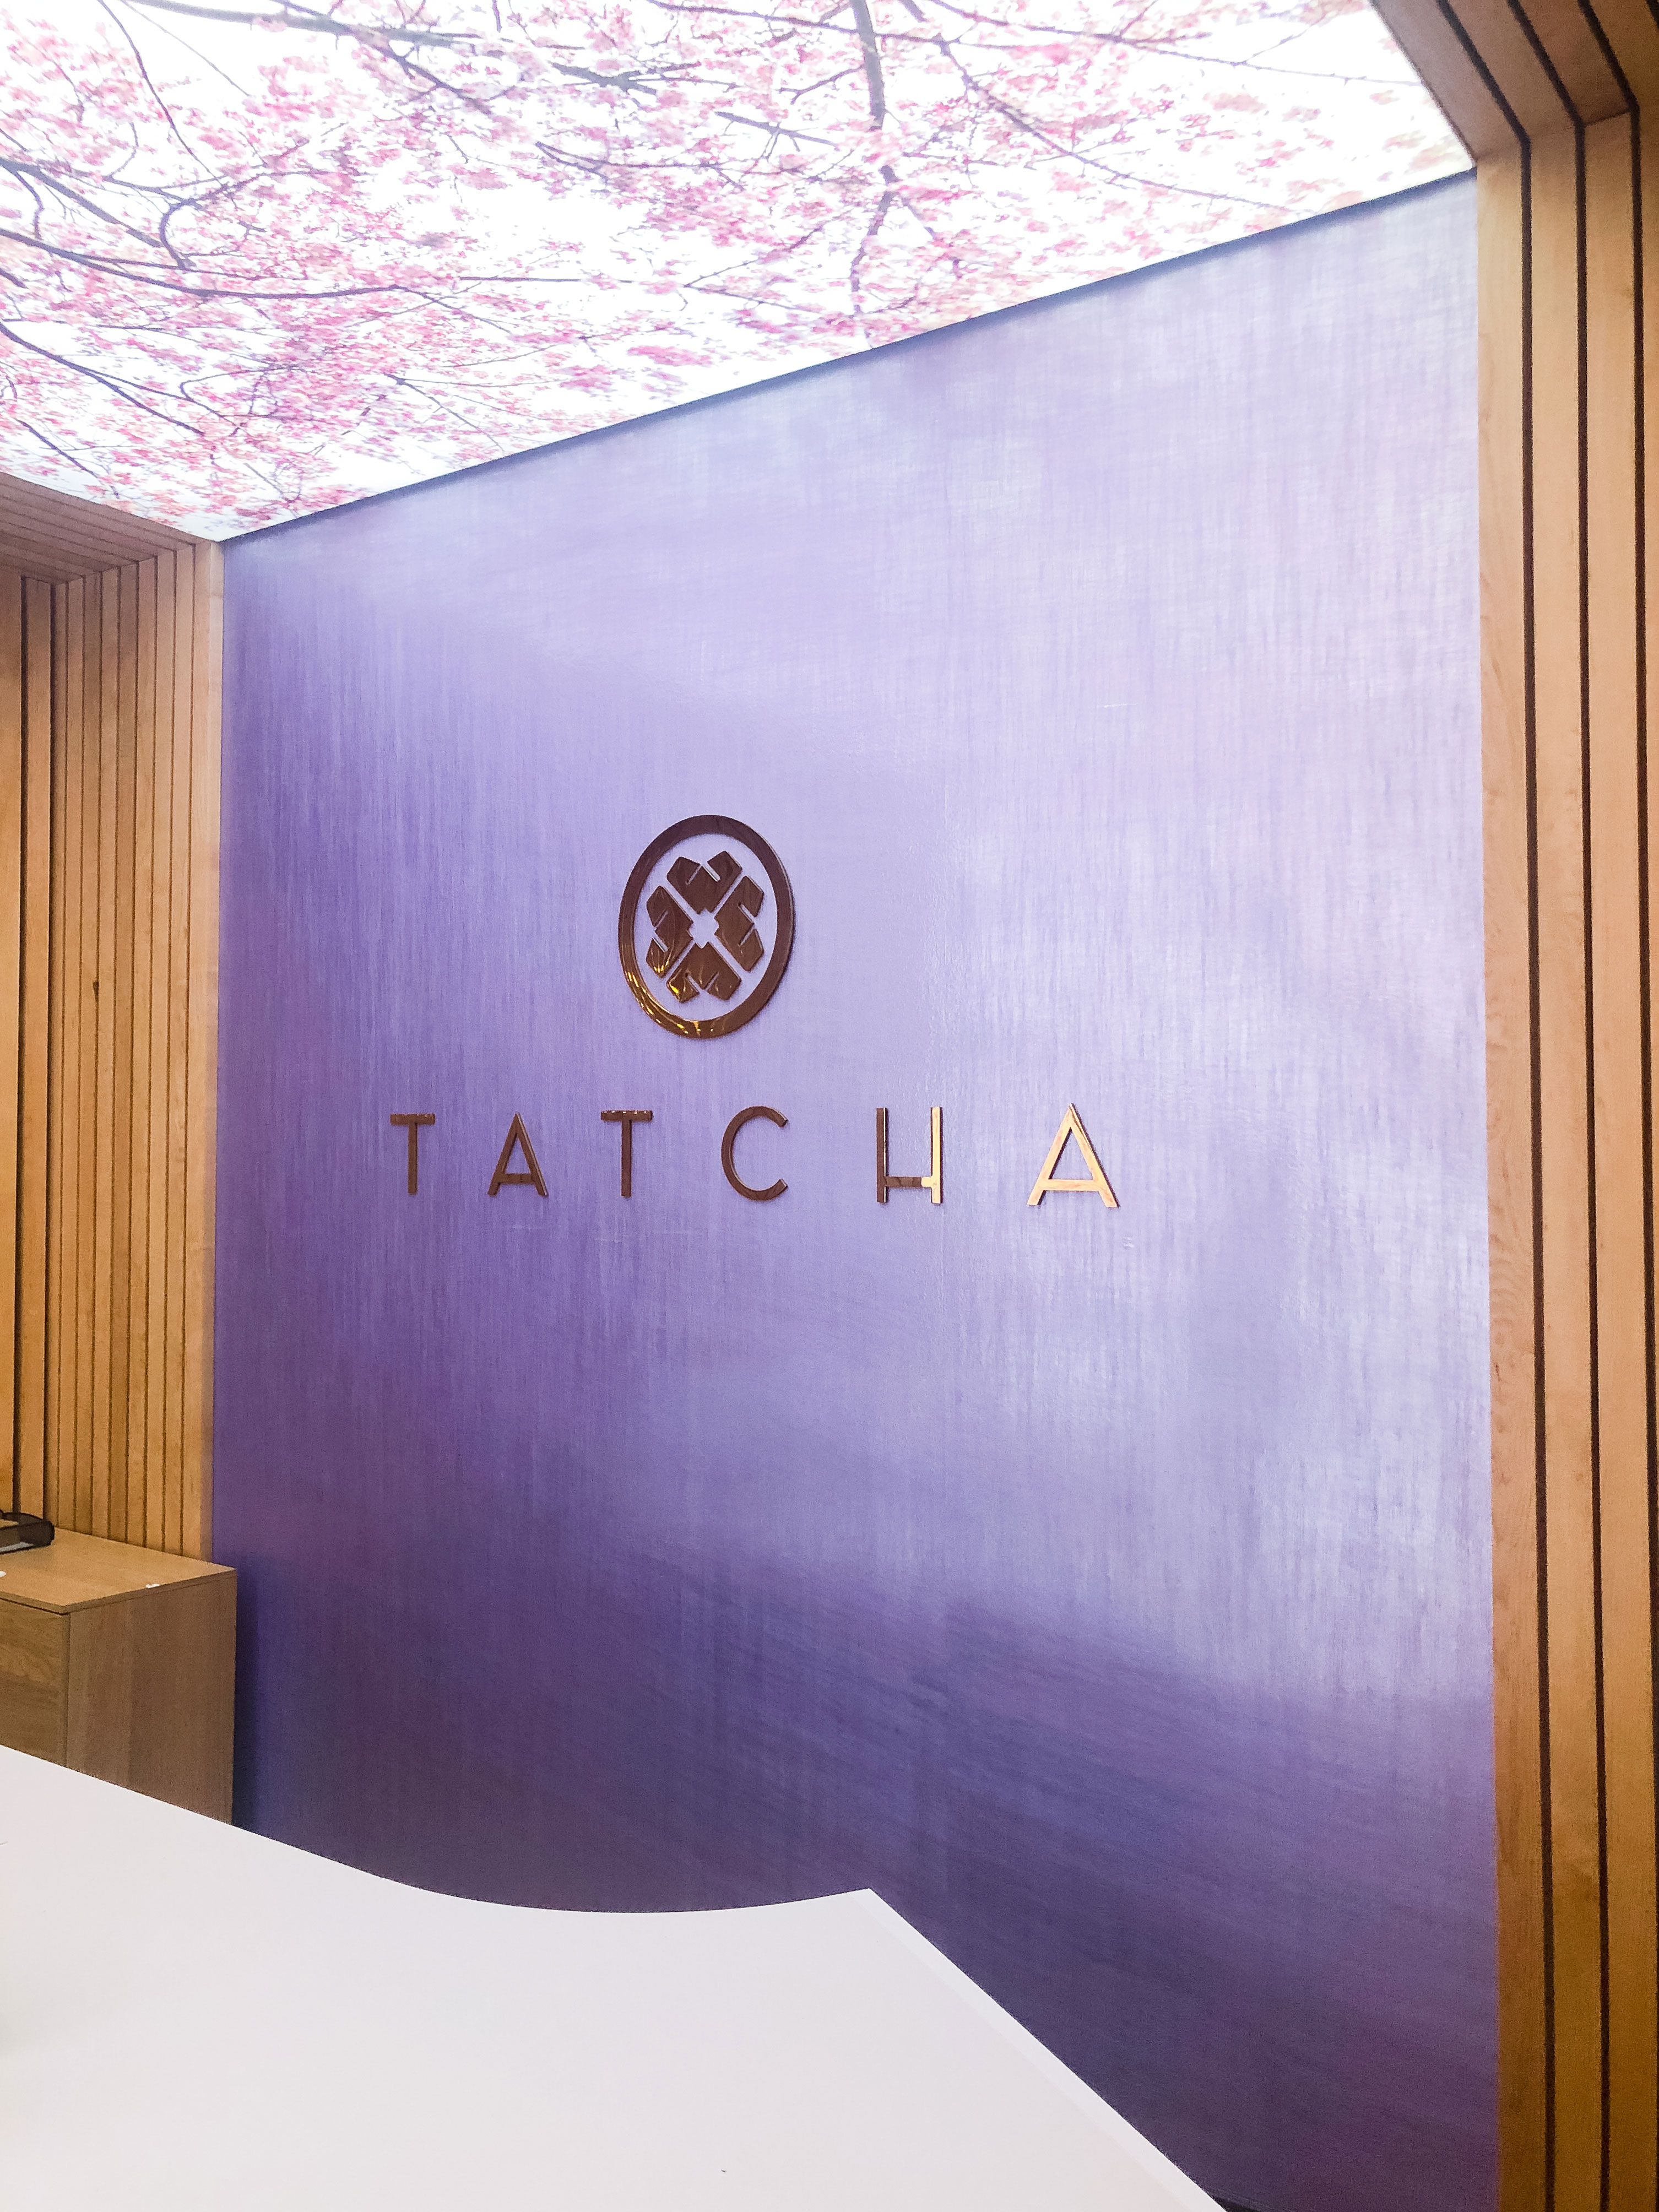 Solid polished brass sign on purple silk wall for the lobby at Tatcha, a company that creates luxury Japanese beauty products.